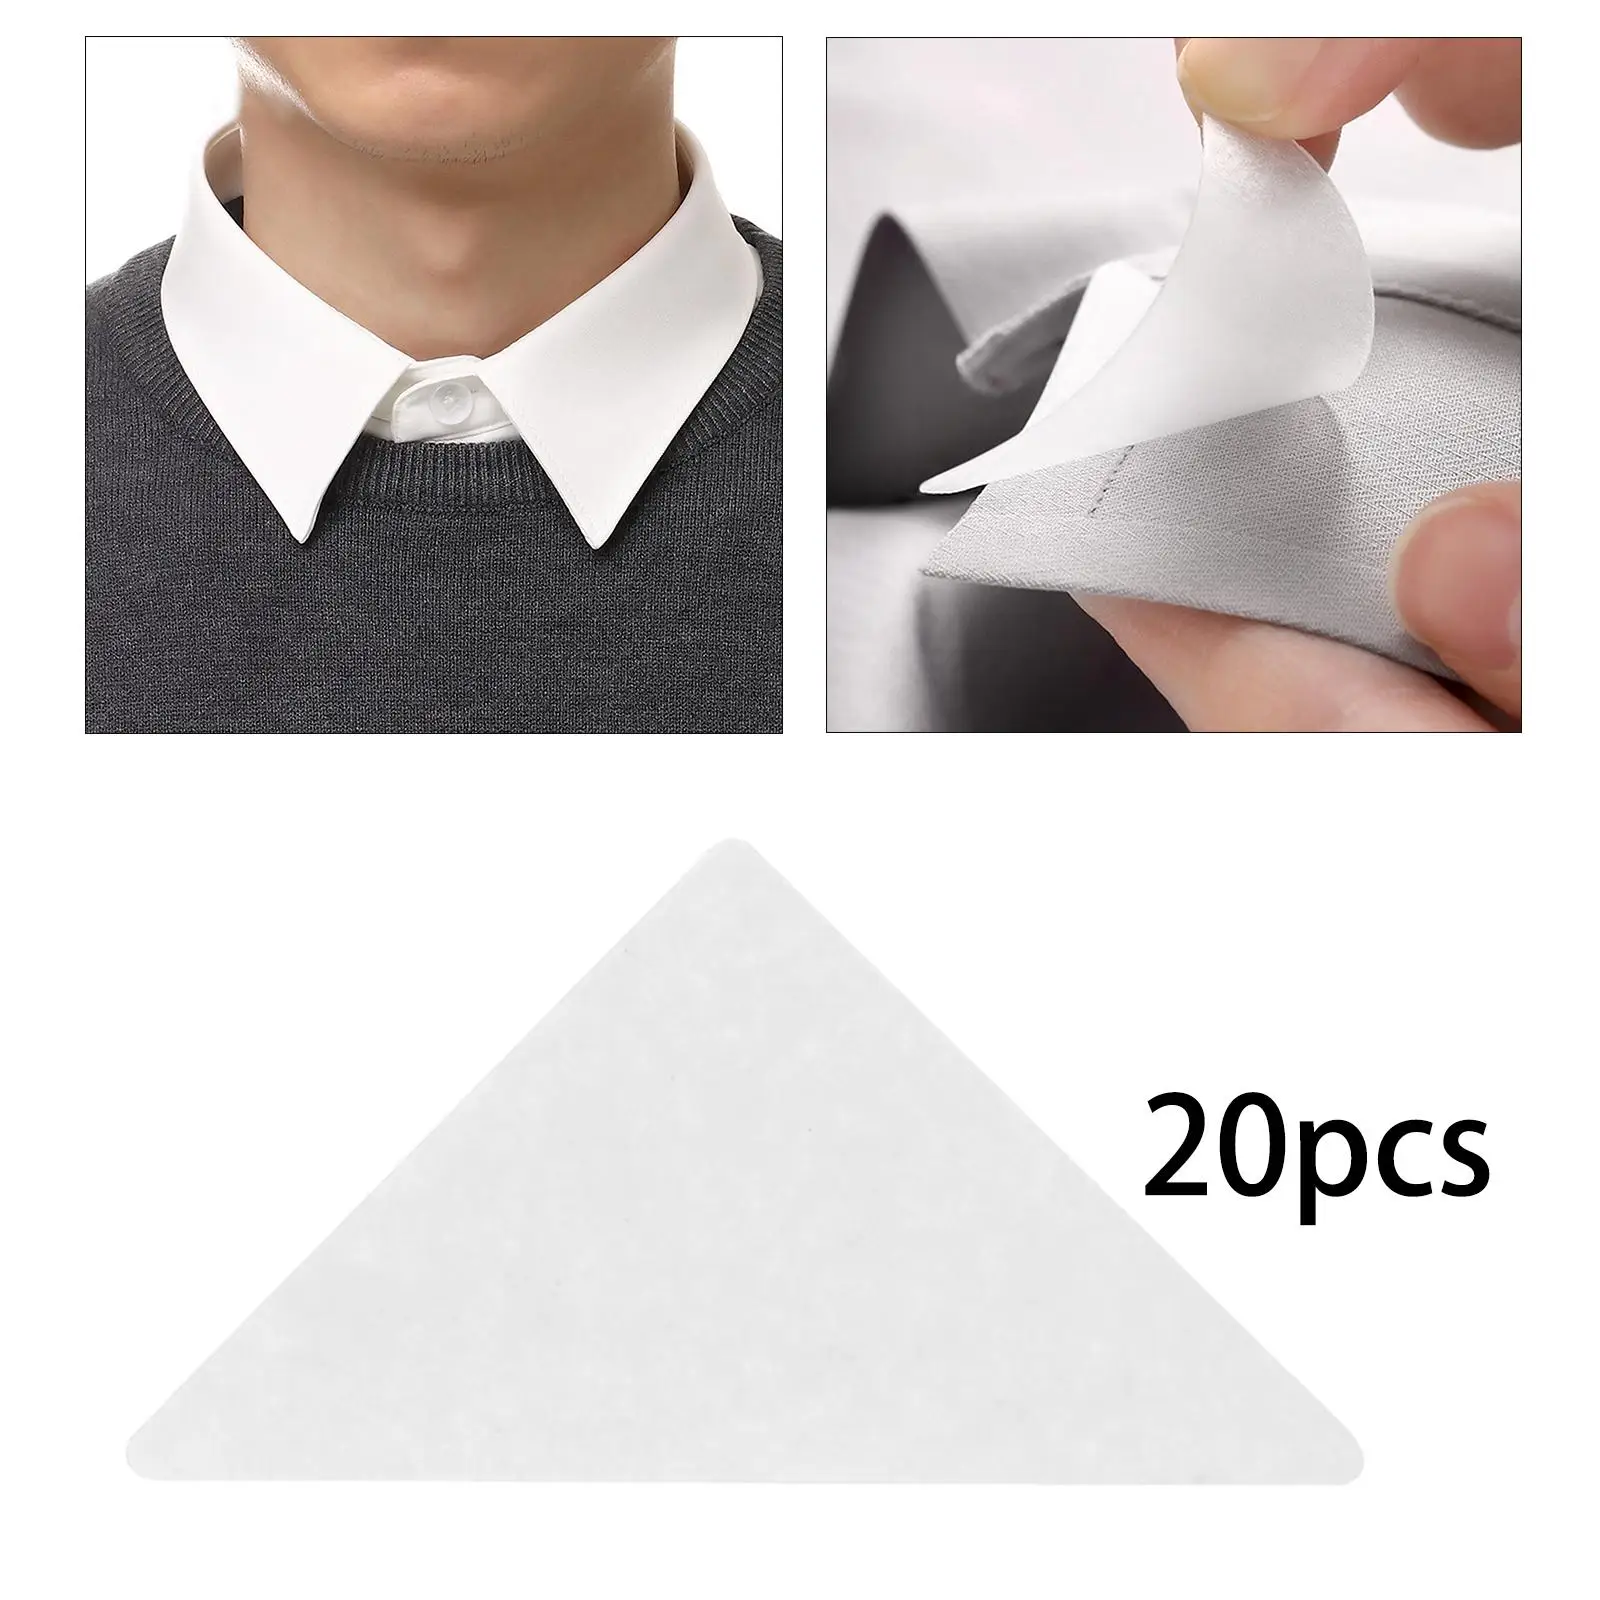  Styling Tape Invisible Not Easy to Fall Liner Pads Neck Pads Shirt   Artifact for Shaping Clothes